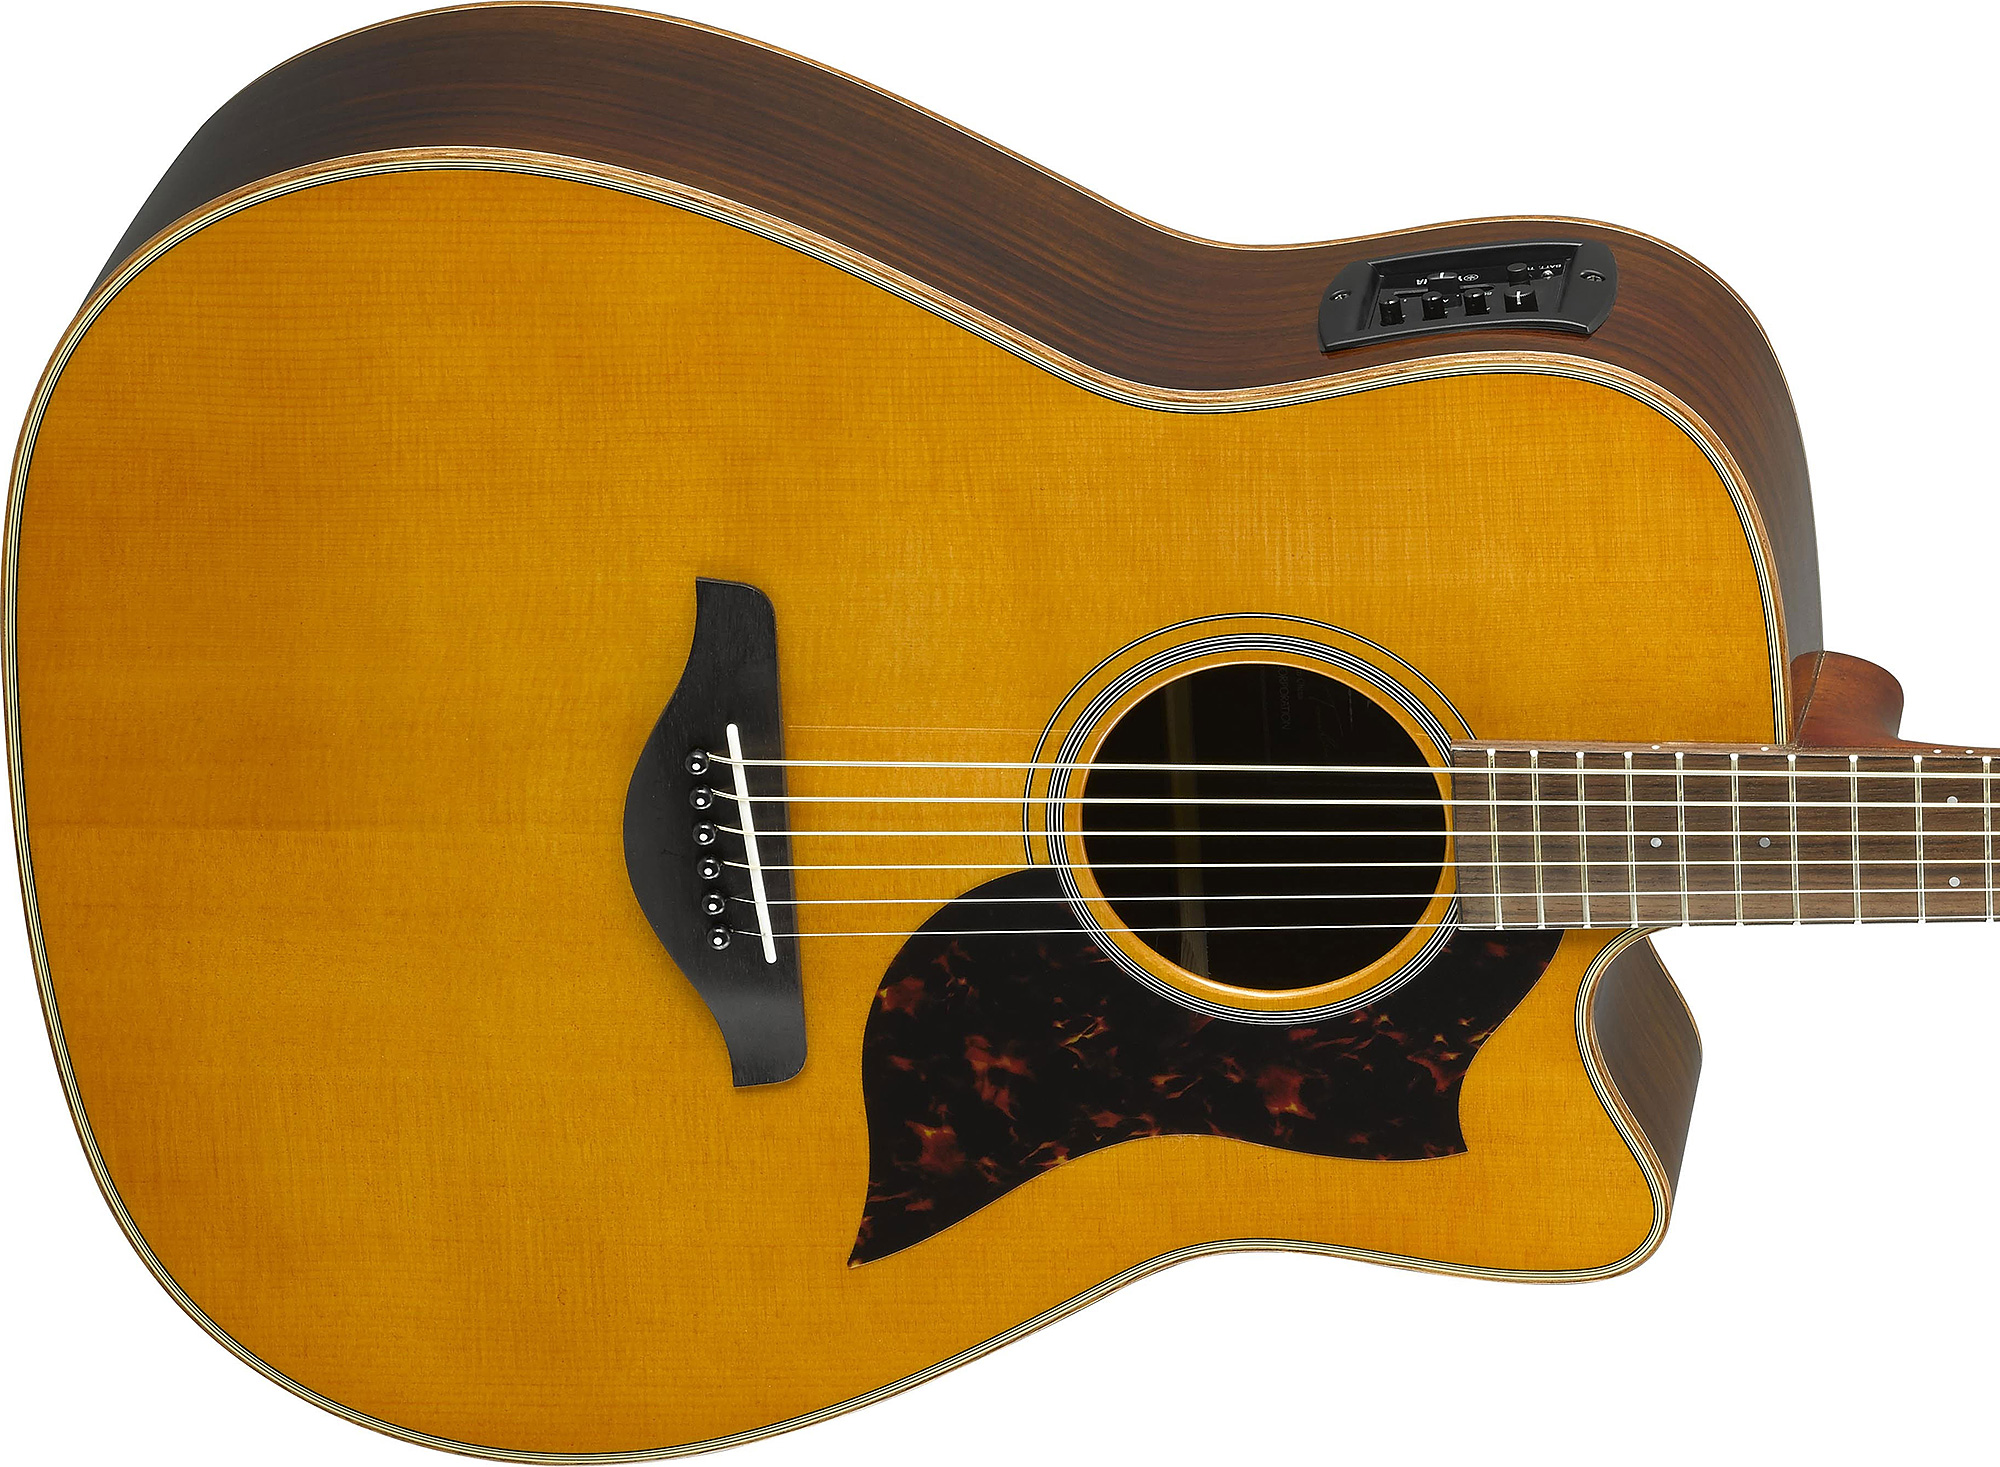 Yamaha A1r Ii Vn Dreadnought Cw Epicea Palissandre 2017 - Vintage Natural - Guitarra electro acustica - Variation 3